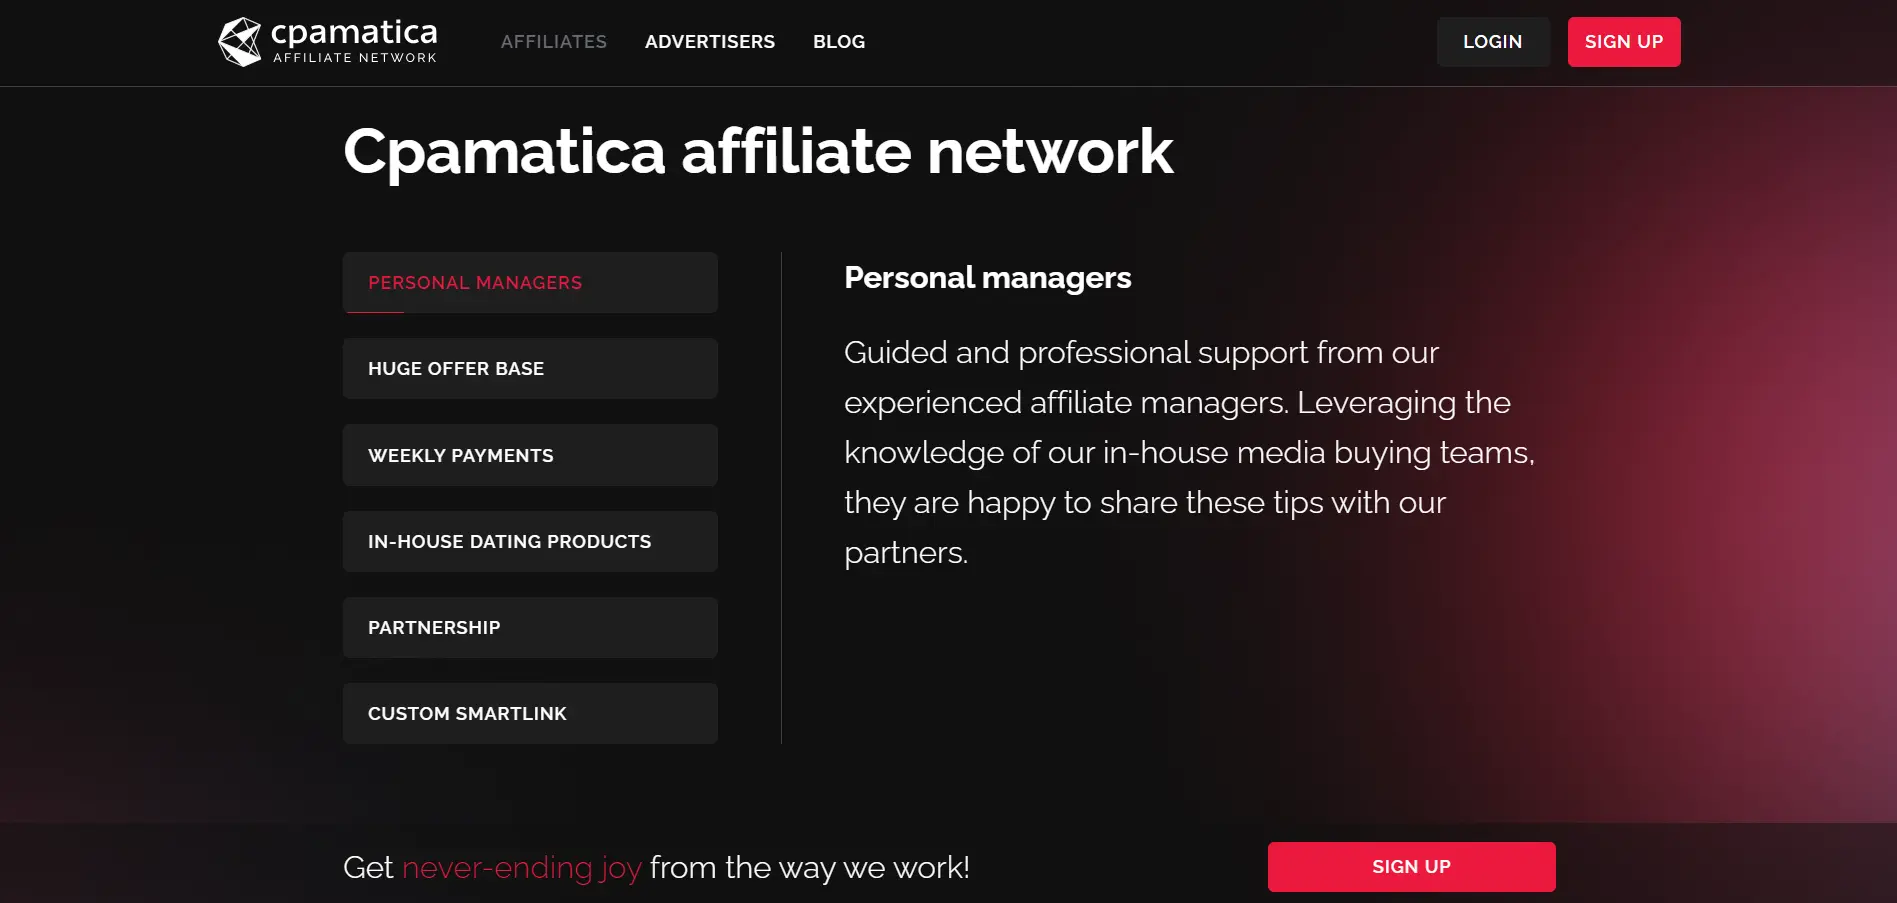 Cpamatica Network